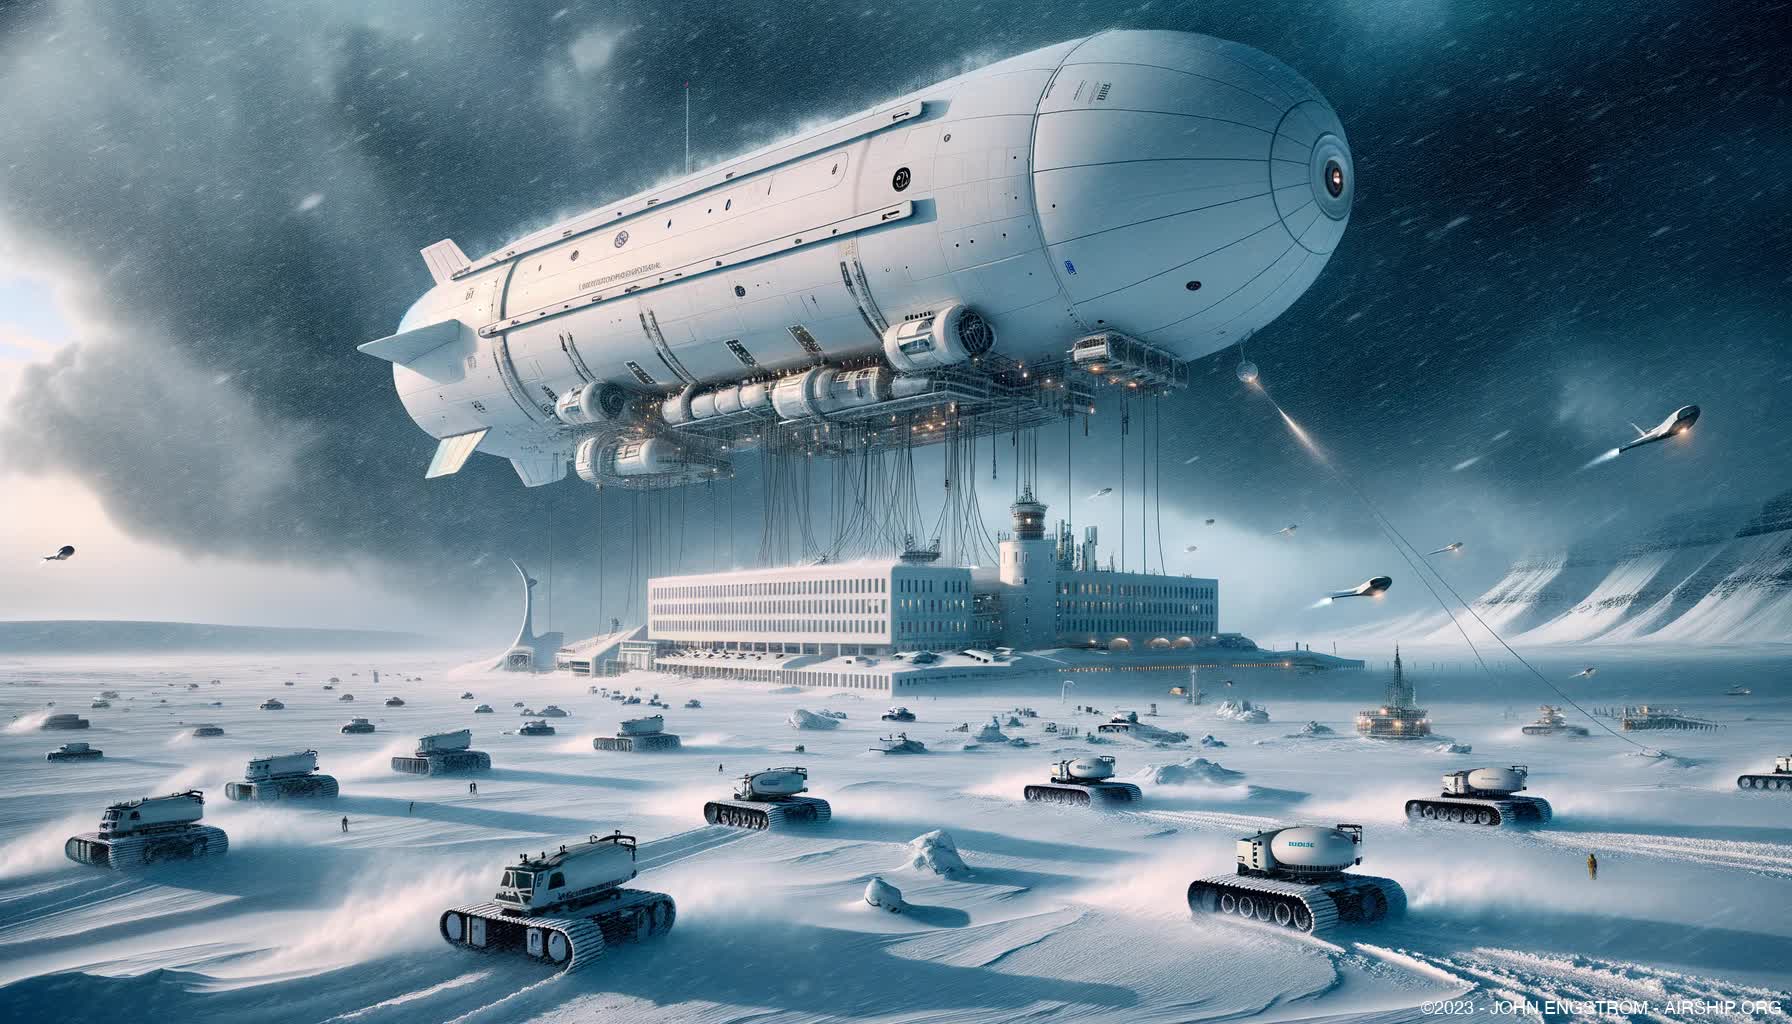 Airship-Assembled-Arctic-Research-Hotel-45